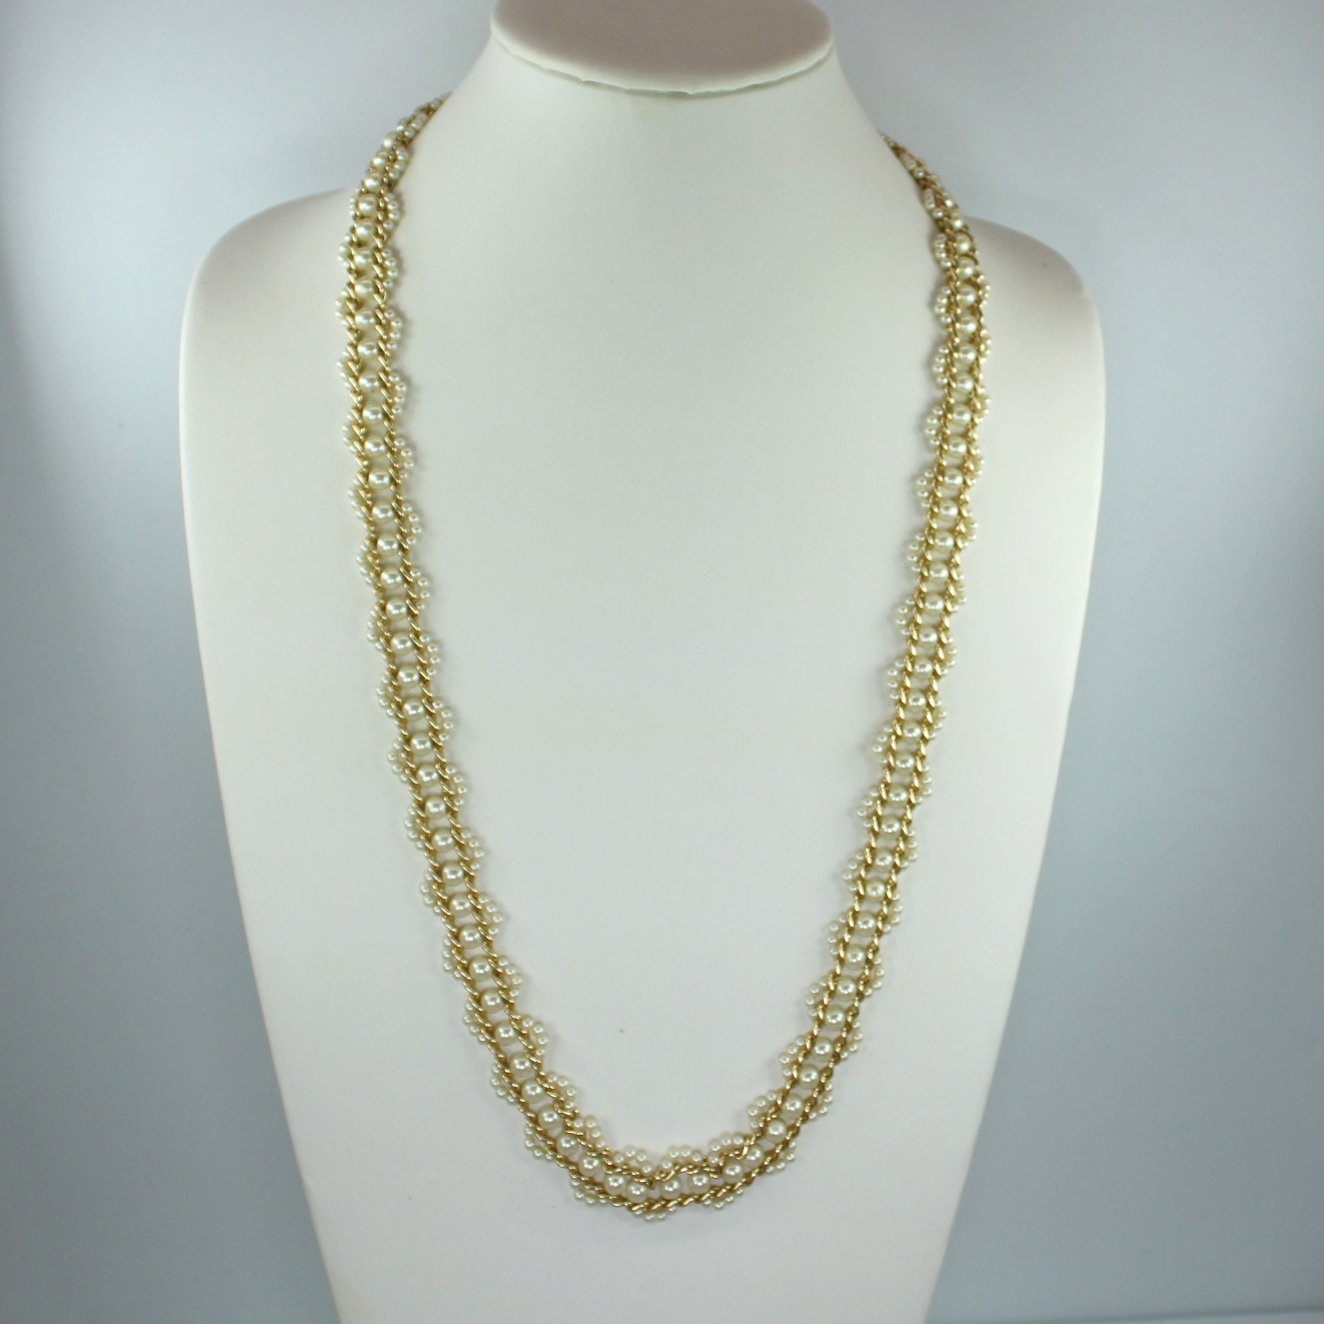 Woven Pearl Gold Tone Link Belt Necklace Hong Kong  Long 46" neck view